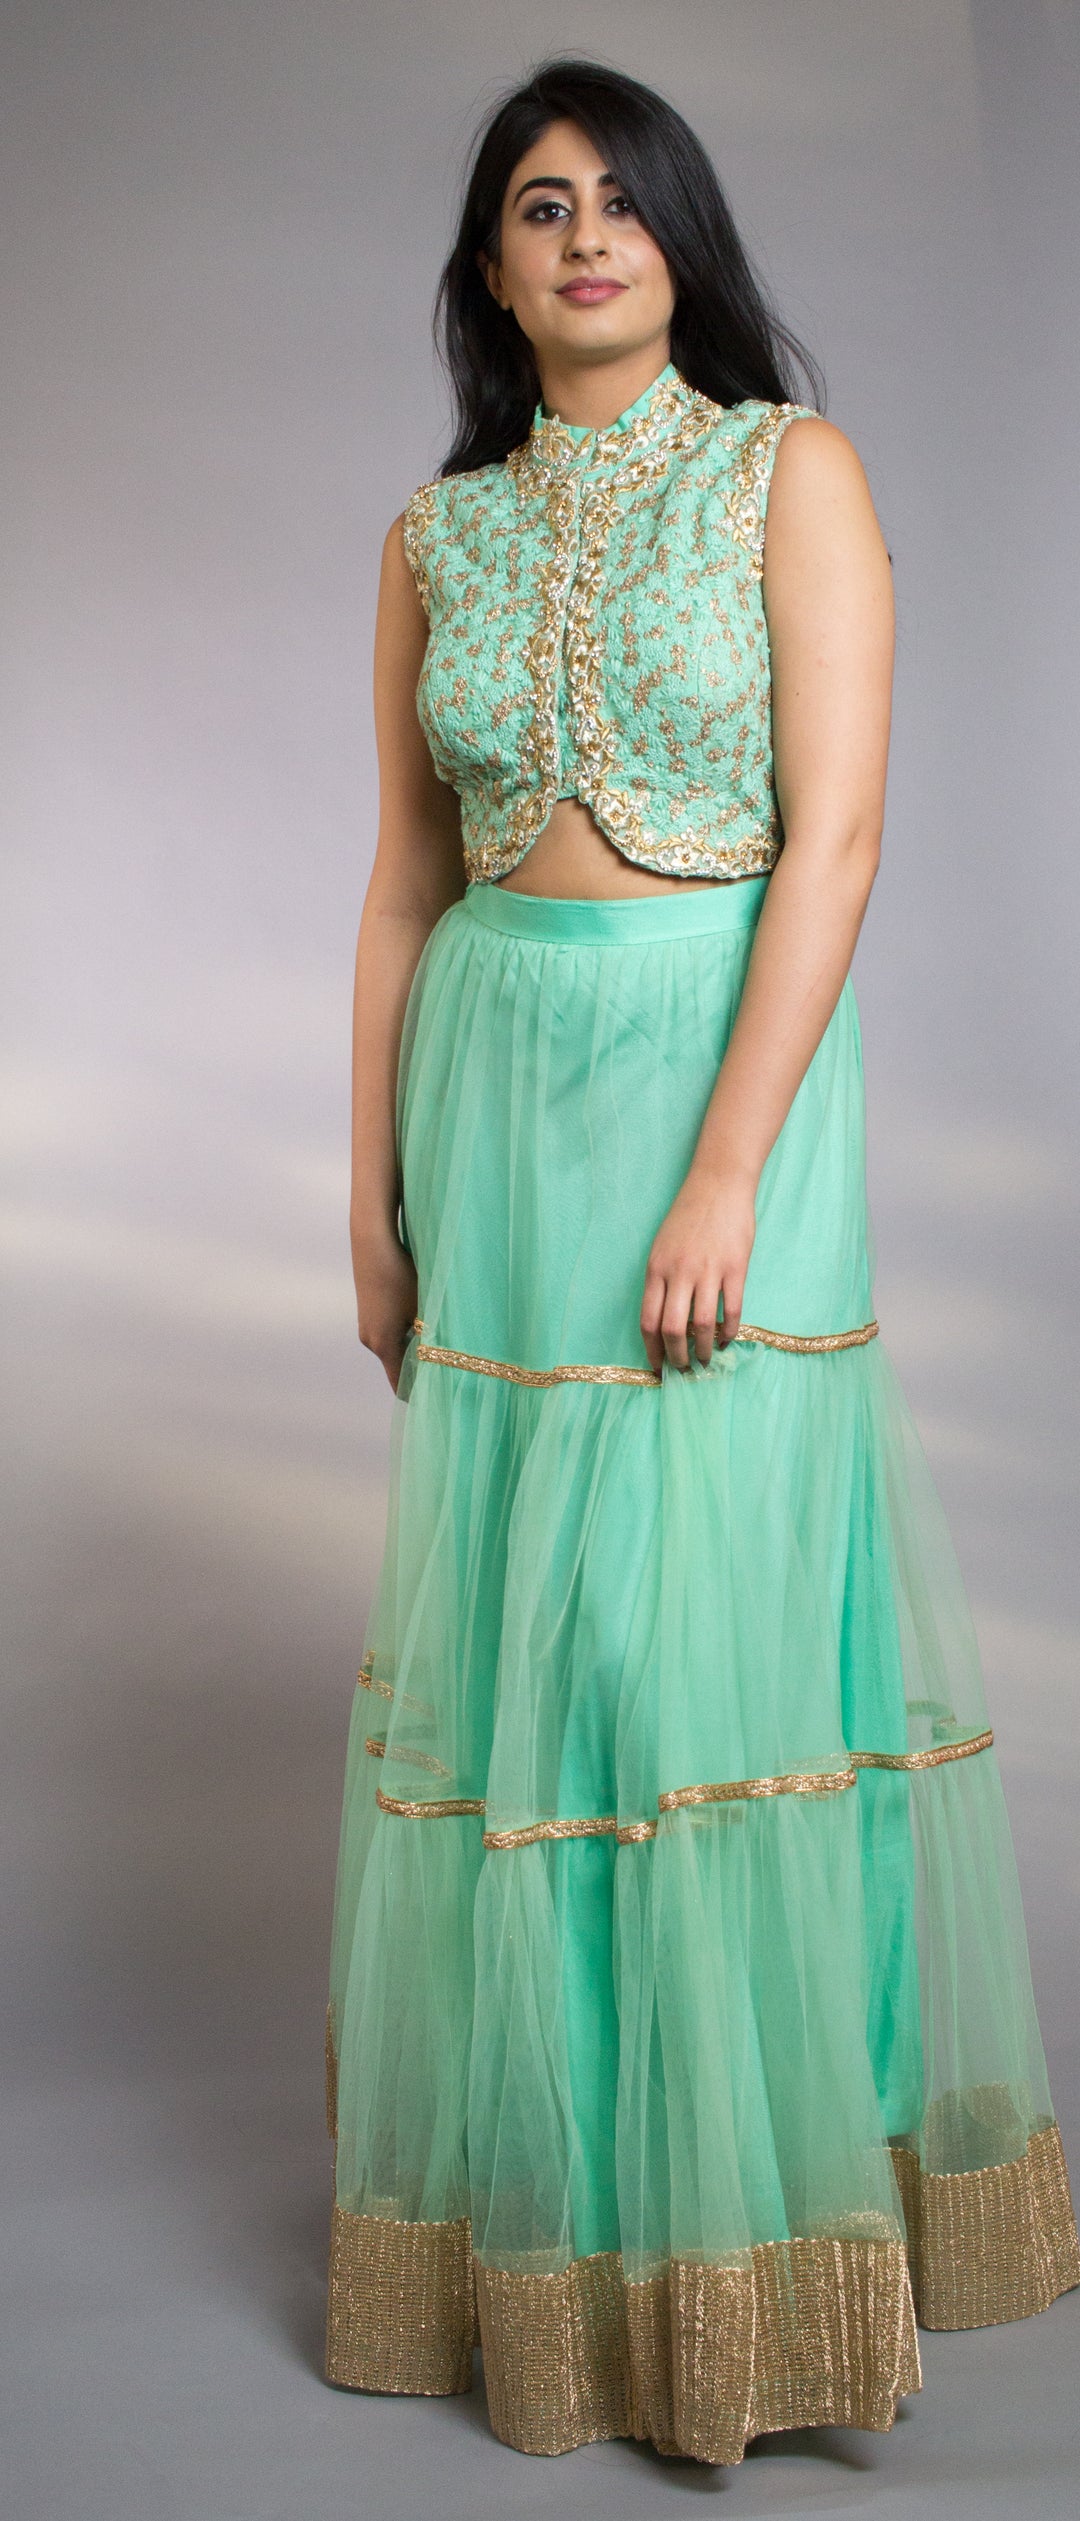 Mint Green Embroidered Net Crop Top With Net Lehenga Skirt - Rent